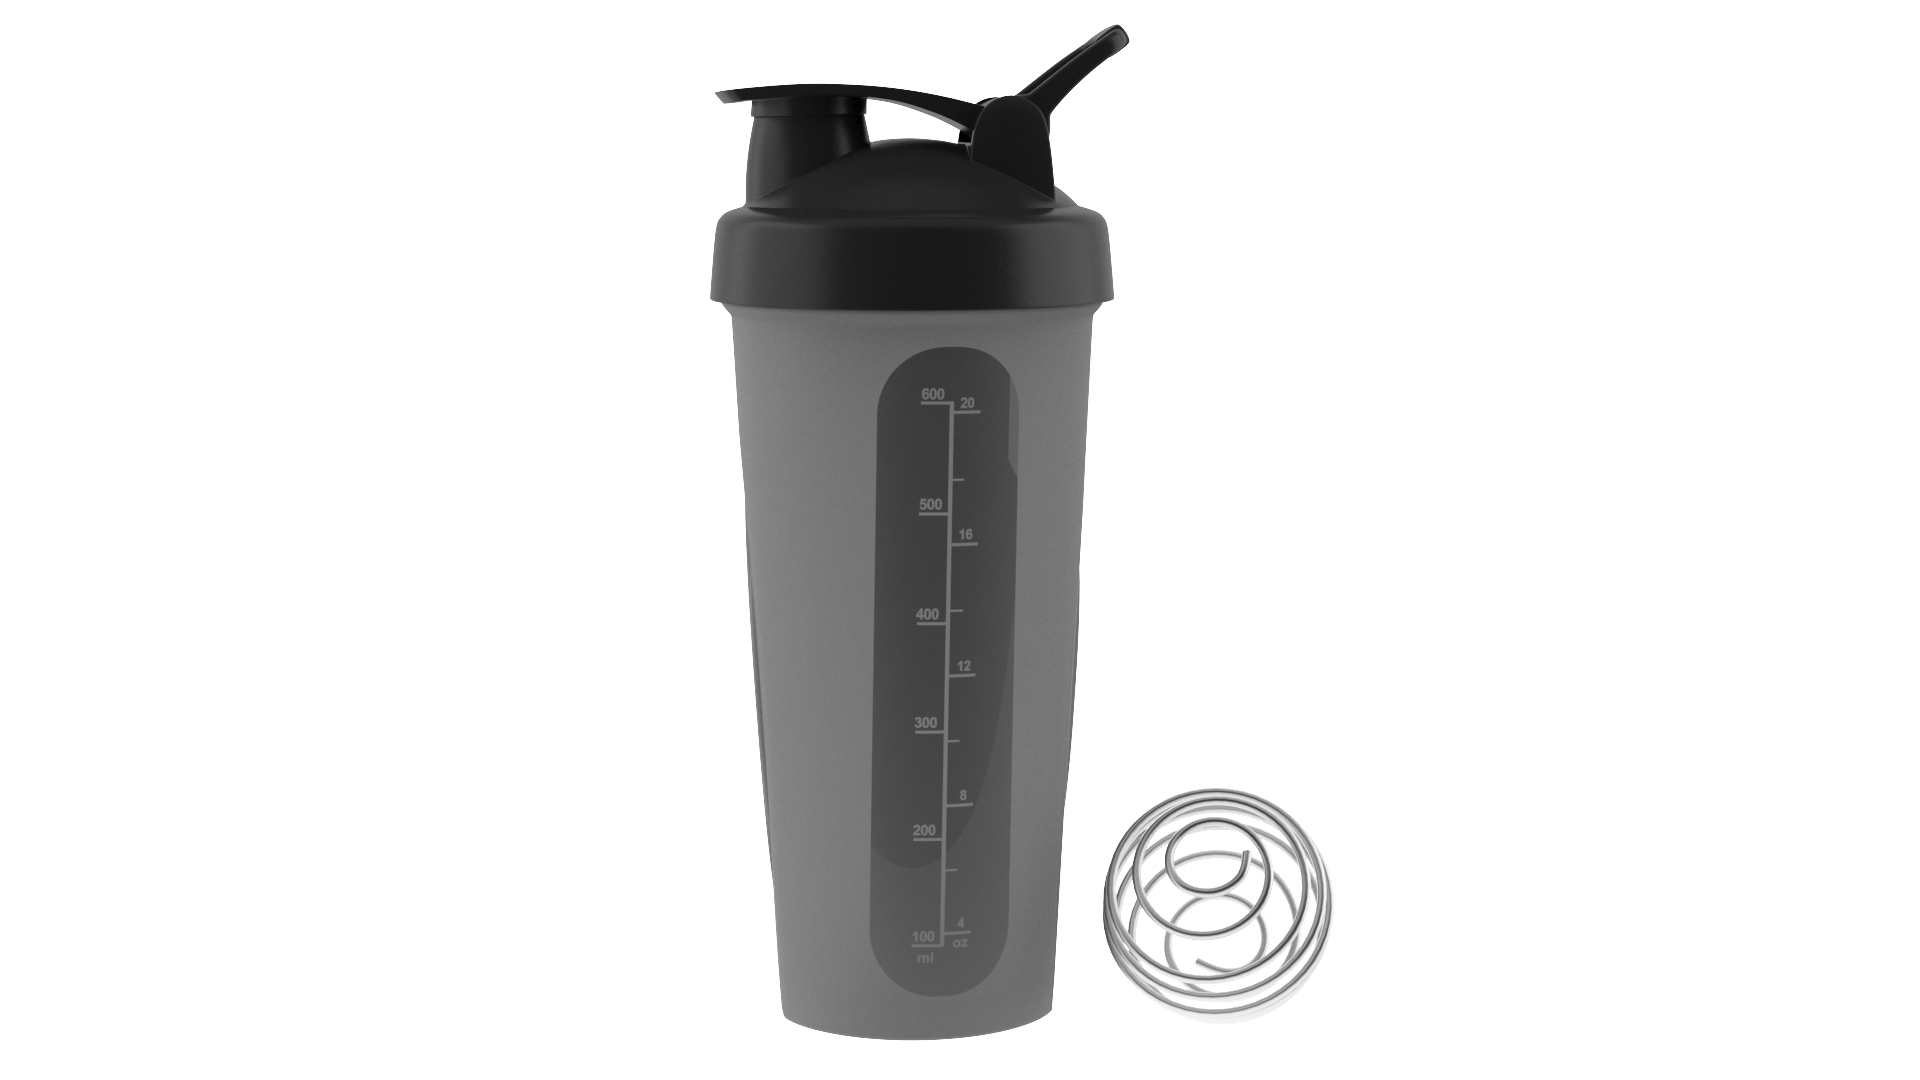 17,998 Protein Shaker Images, Stock Photos, 3D objects, & Vectors